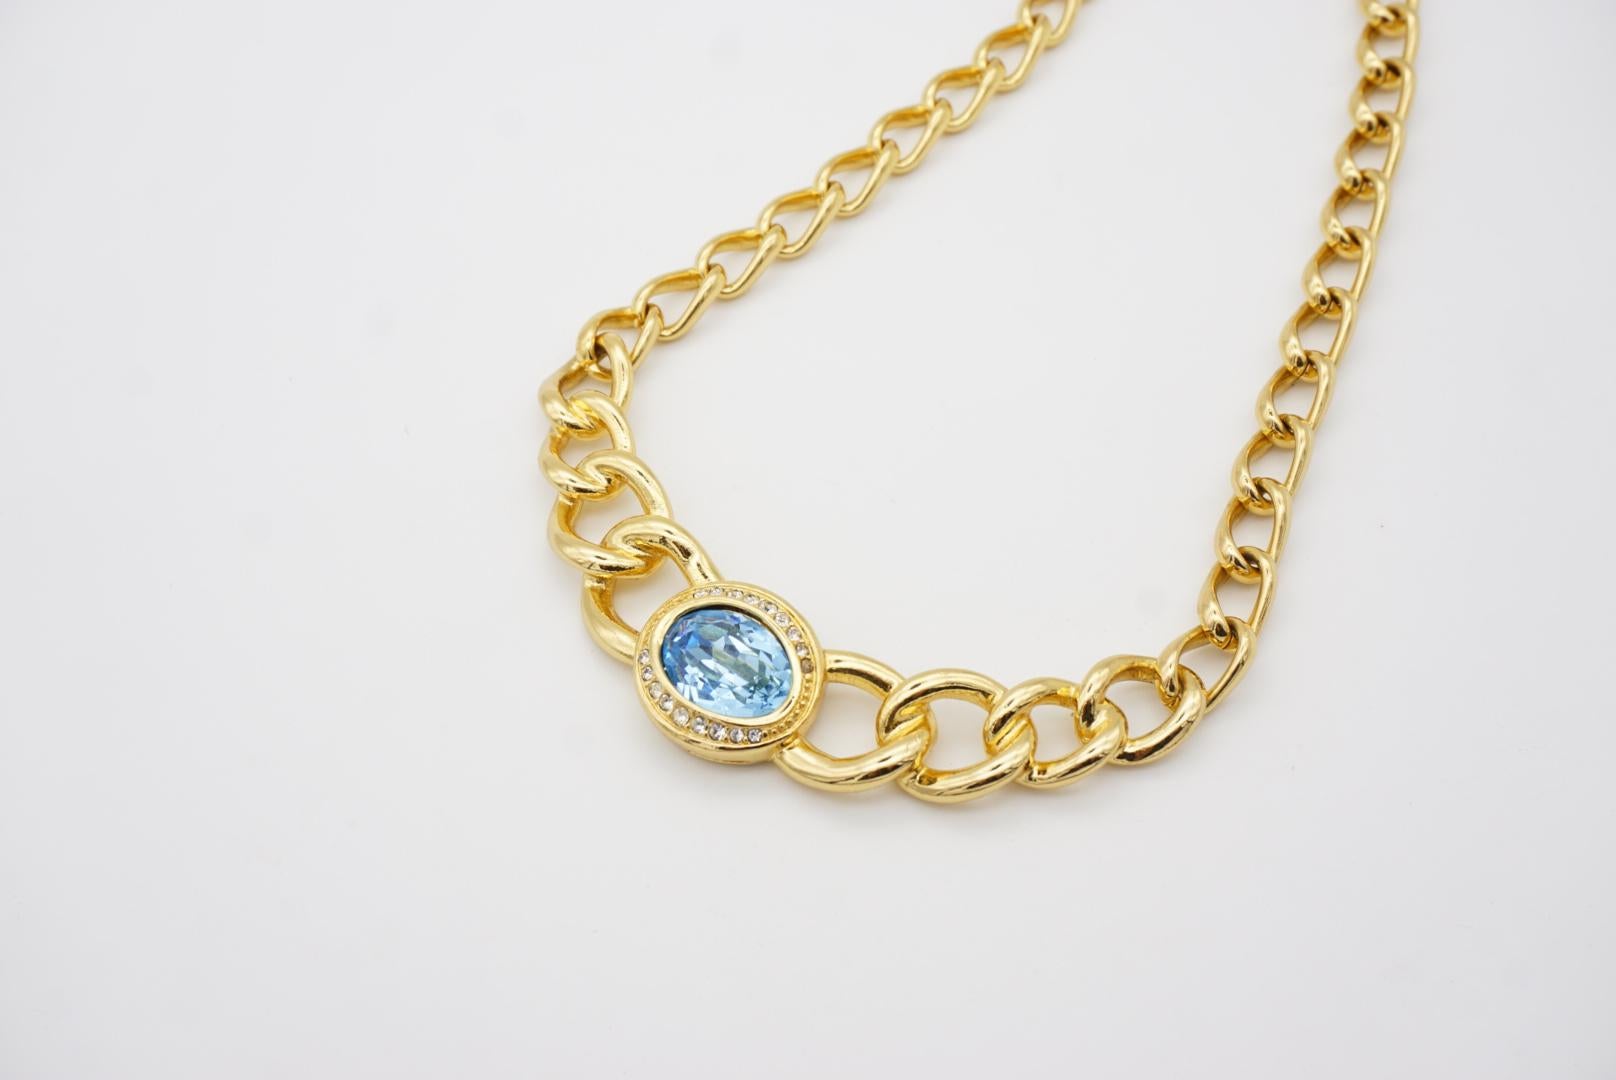 Christian Dior Vintage 1990s Aqua Blue Oval Crystal Chunky Gold Choker Necklace  For Sale 3